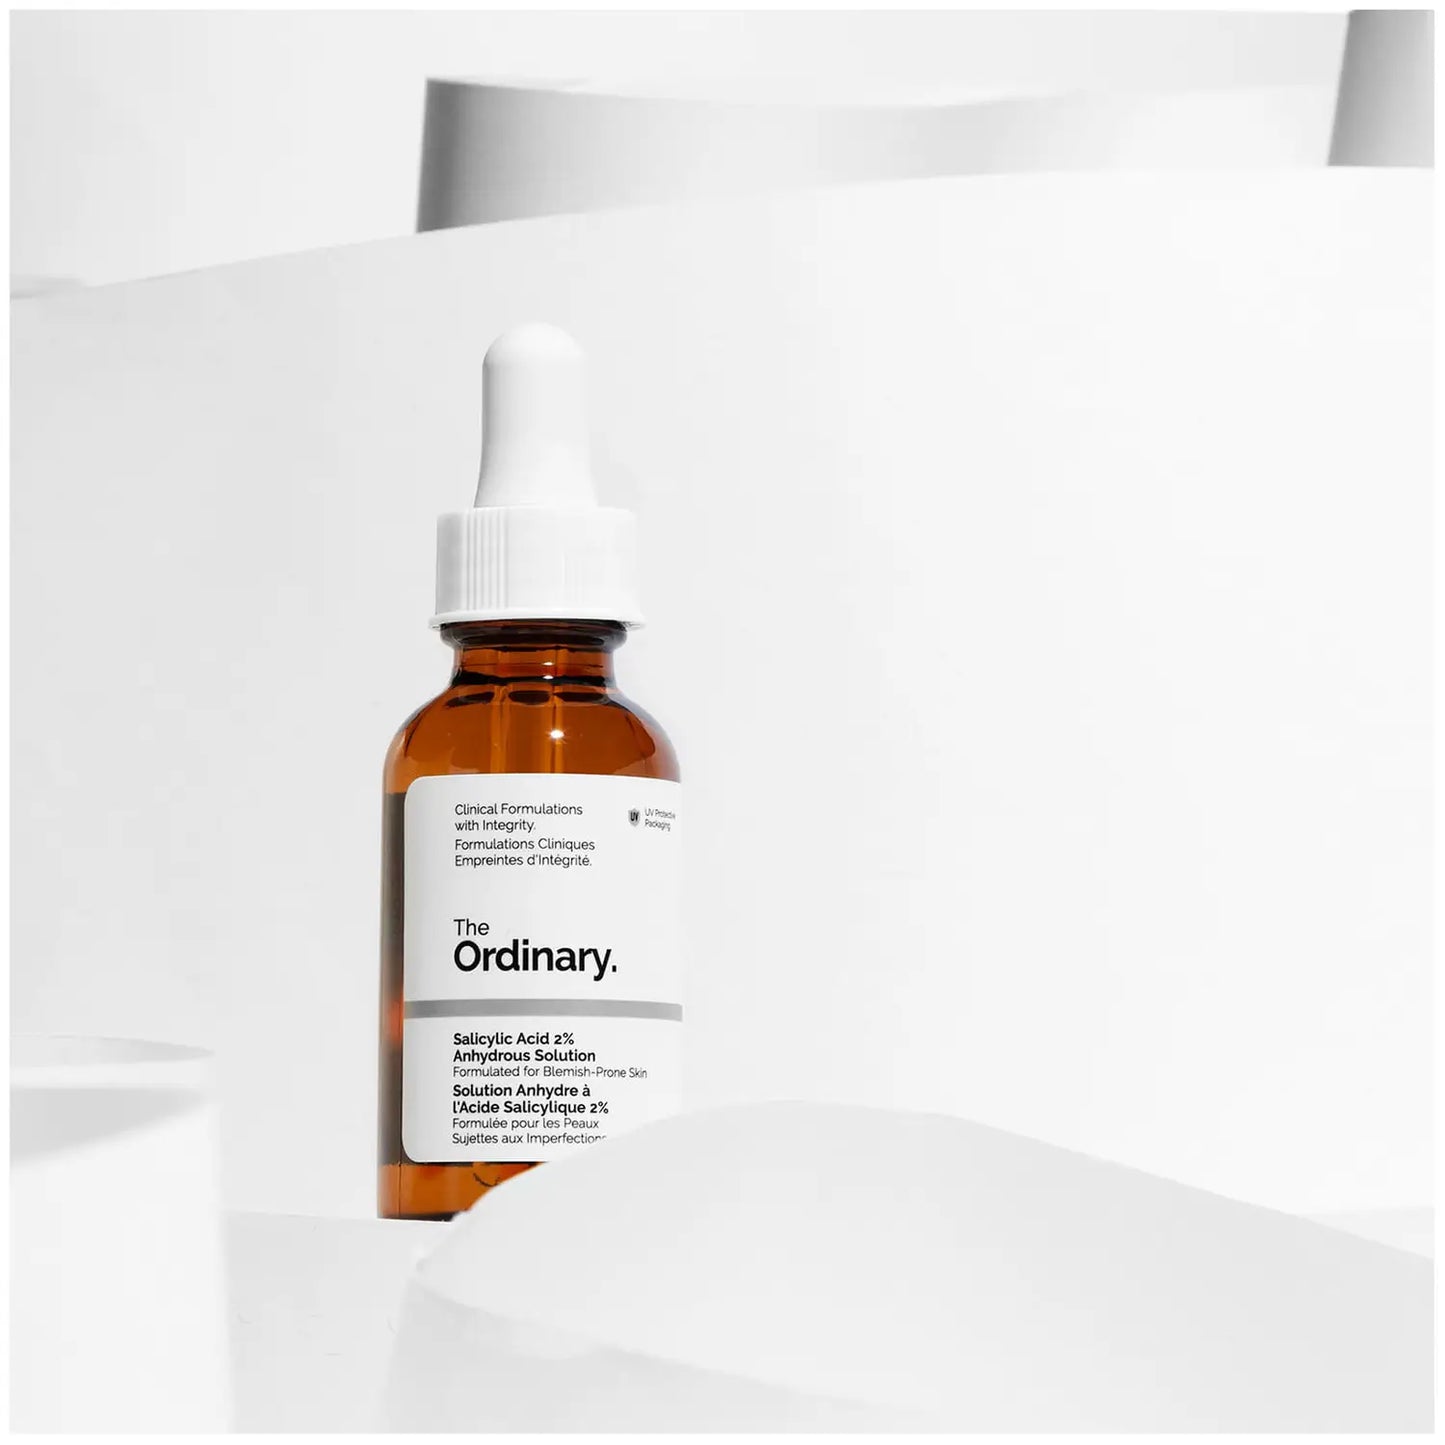 THE ORDINARY SALICYLIC ACID 2% ANHYDROUS SOLUTION